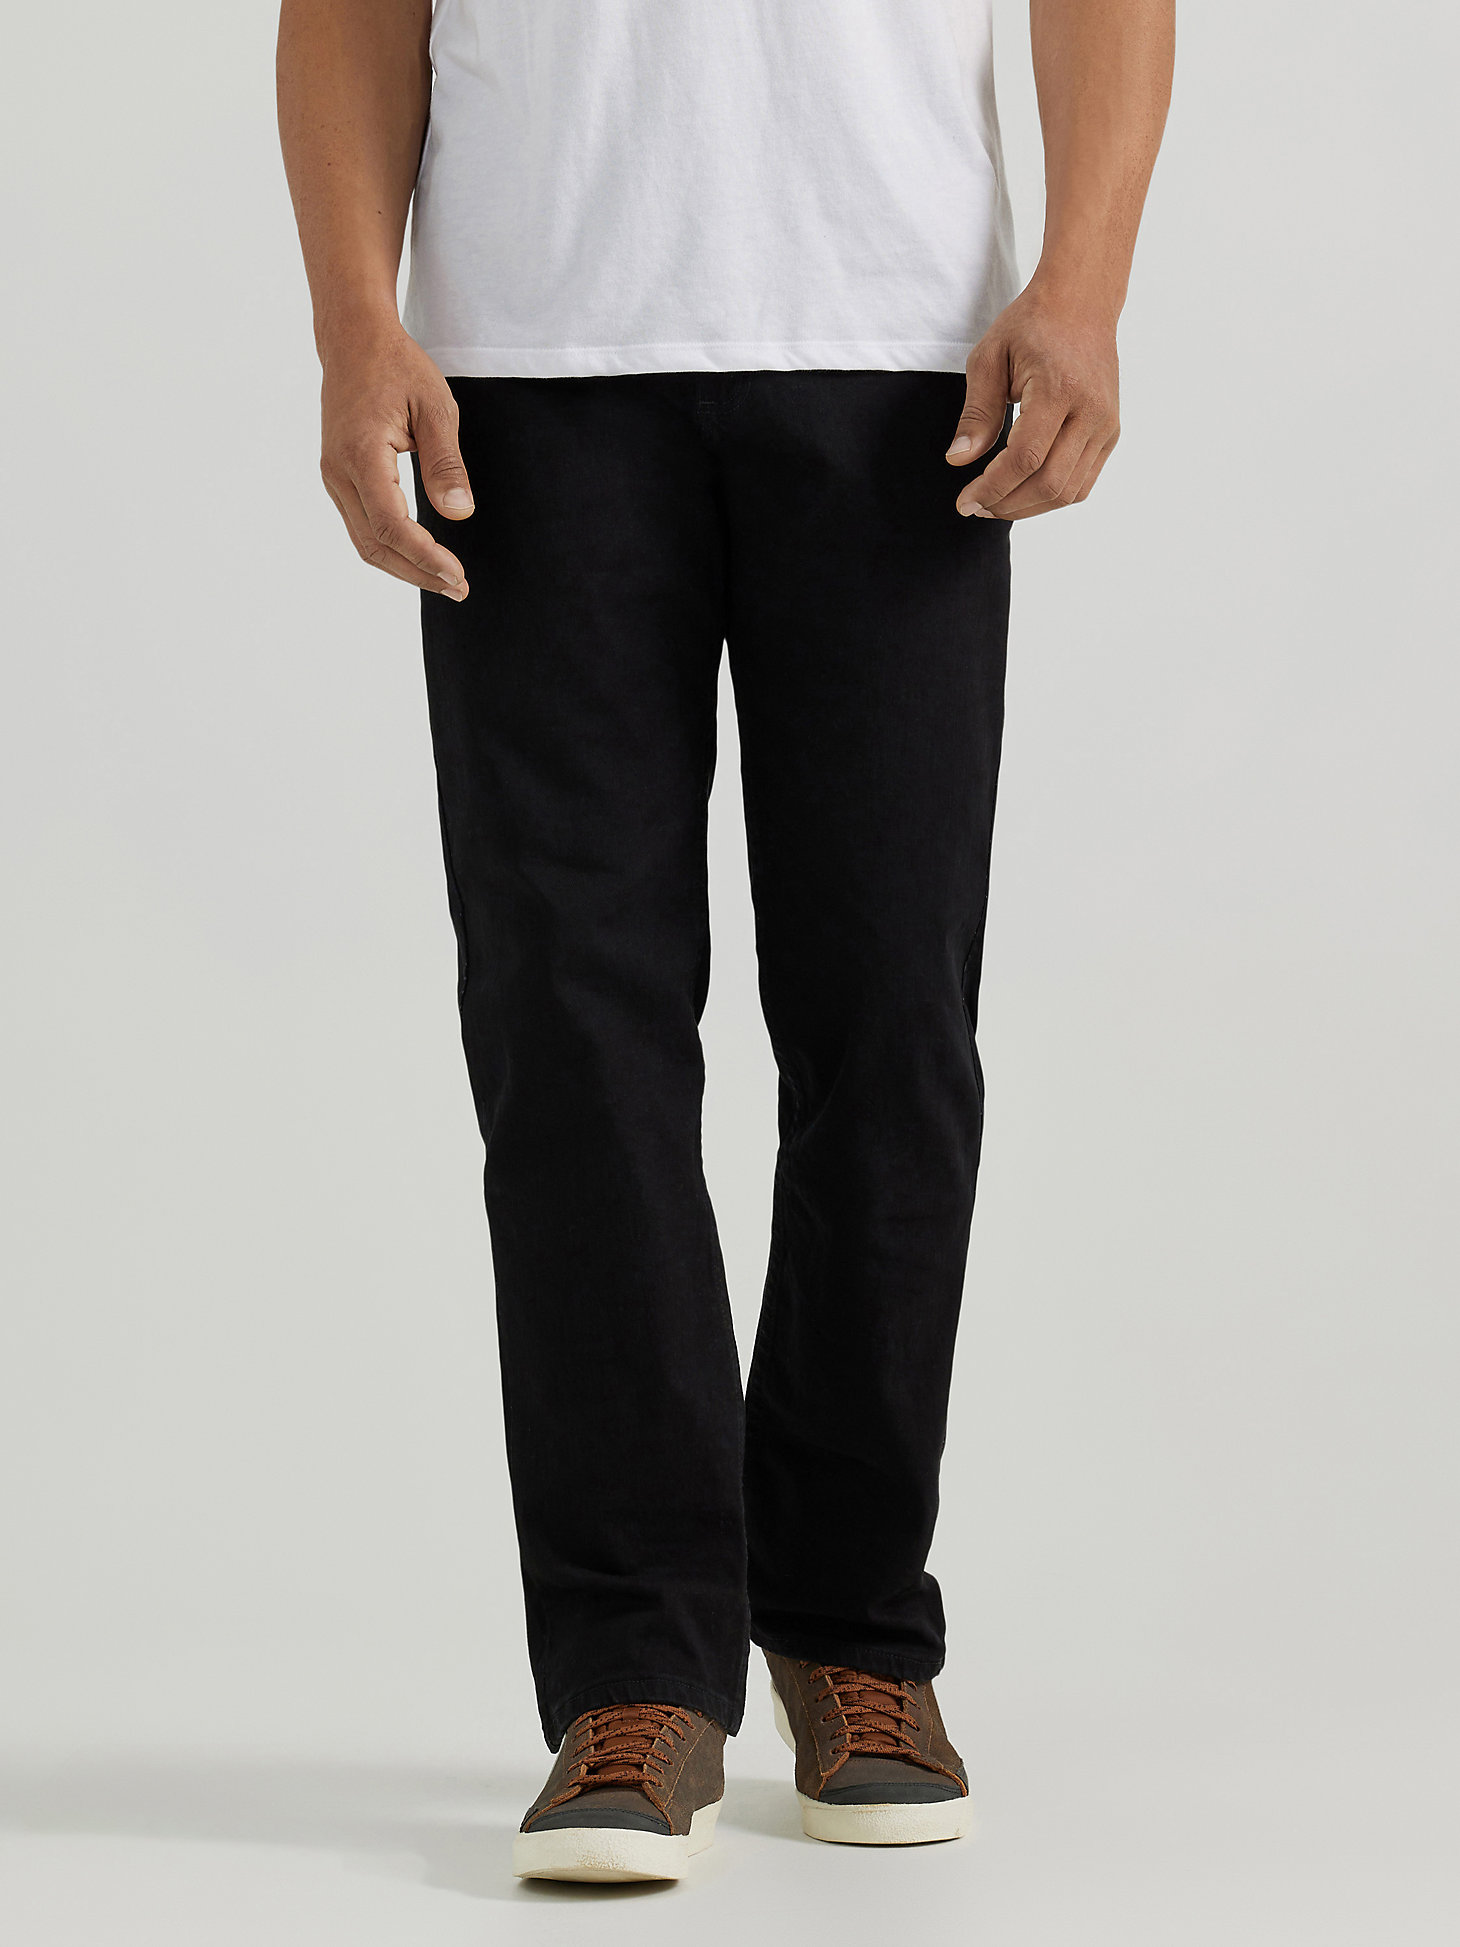 Men's Wrangler Authentics® Relaxed Fit Flex Jean in Black main view